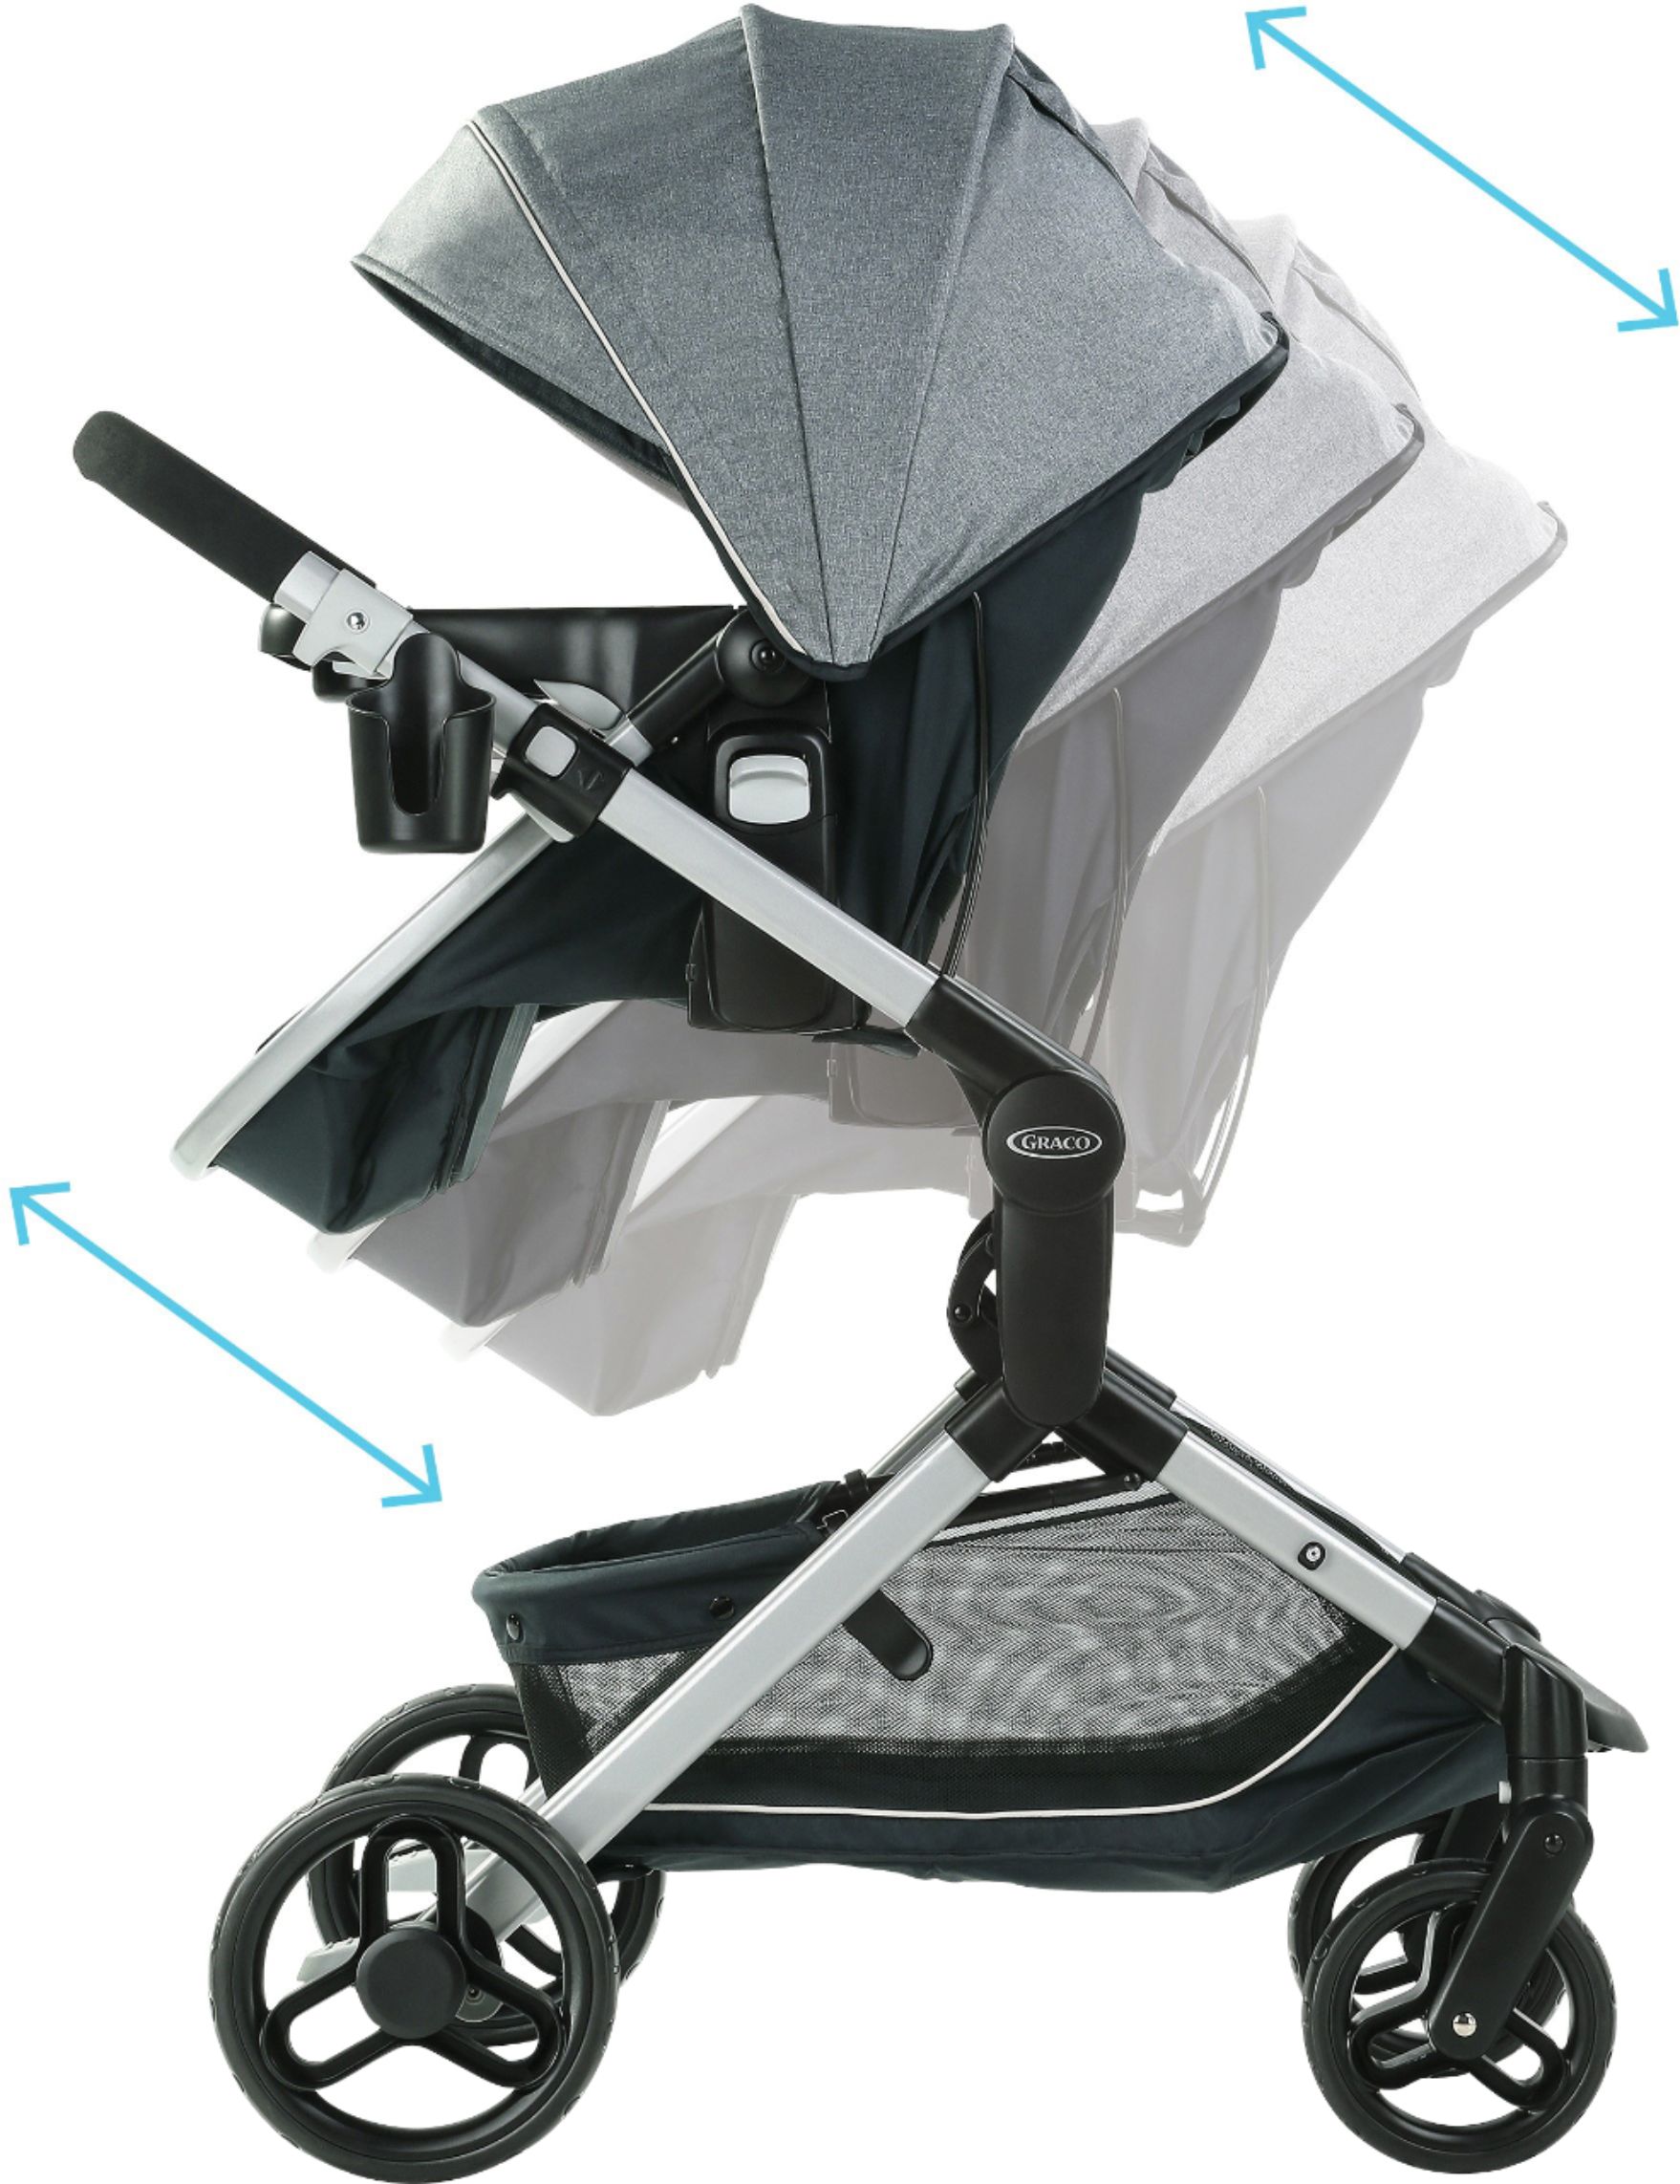 Angle View: Graco Modes Nest Stroller, Spencer